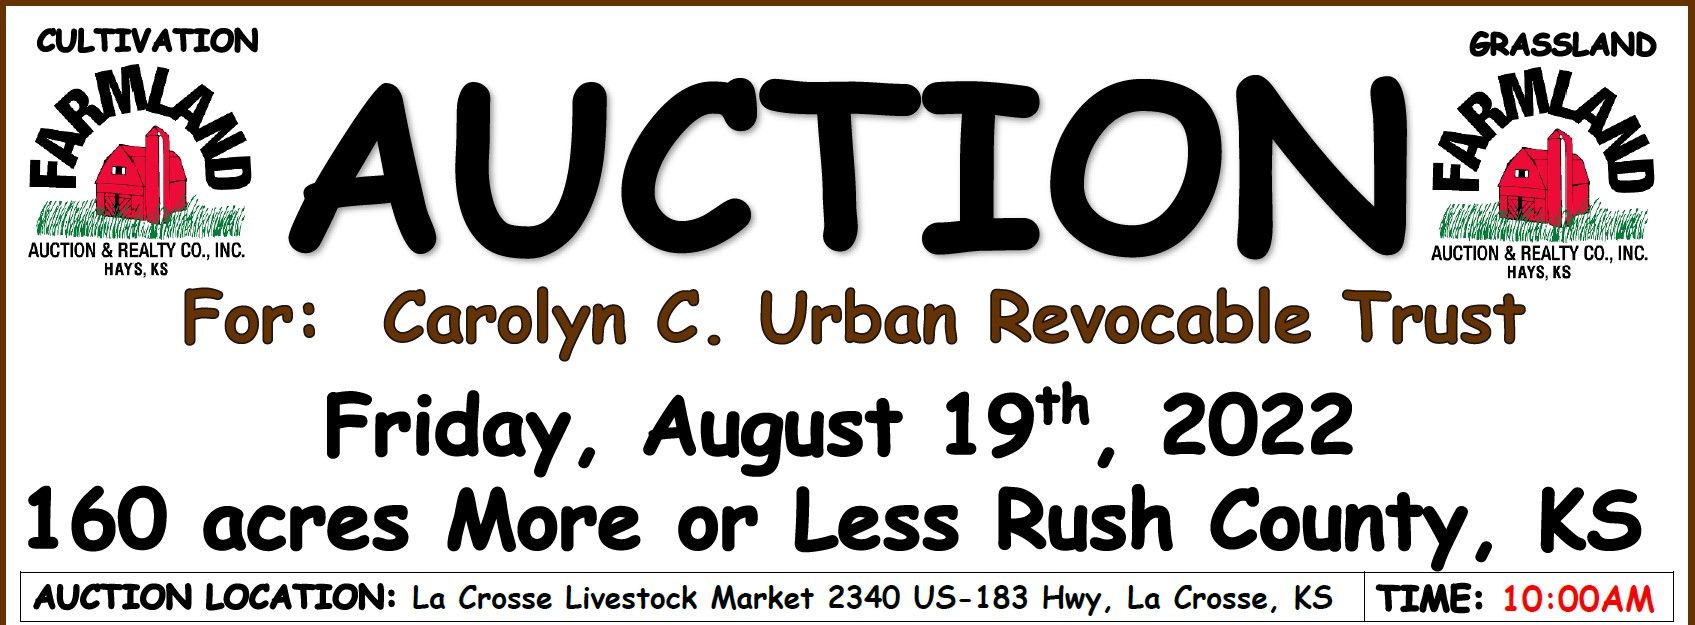 Auction flyer for Auction: 160 acres +/- Rush County, KS